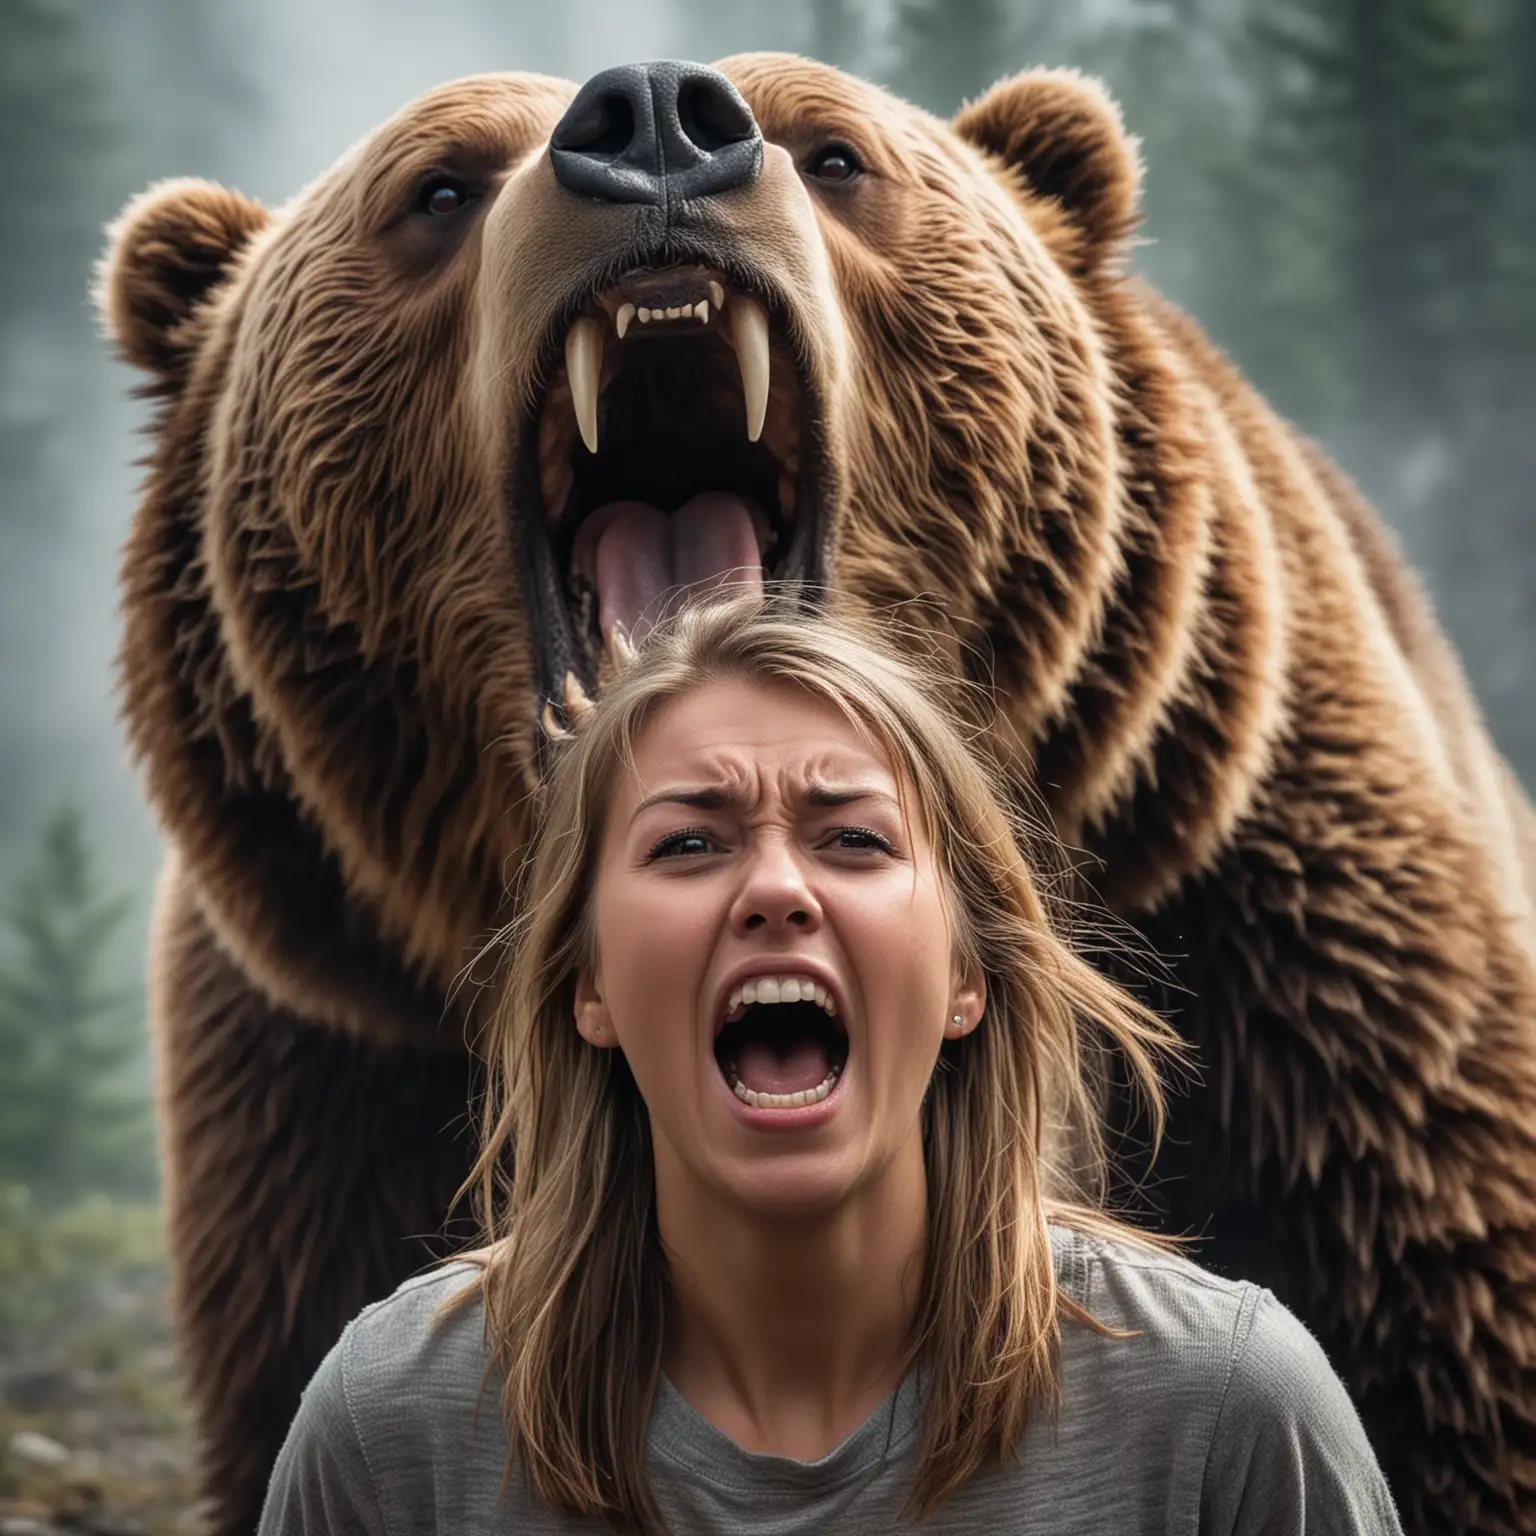 Person Encountering a Grizzly Bear in a Dense Forest